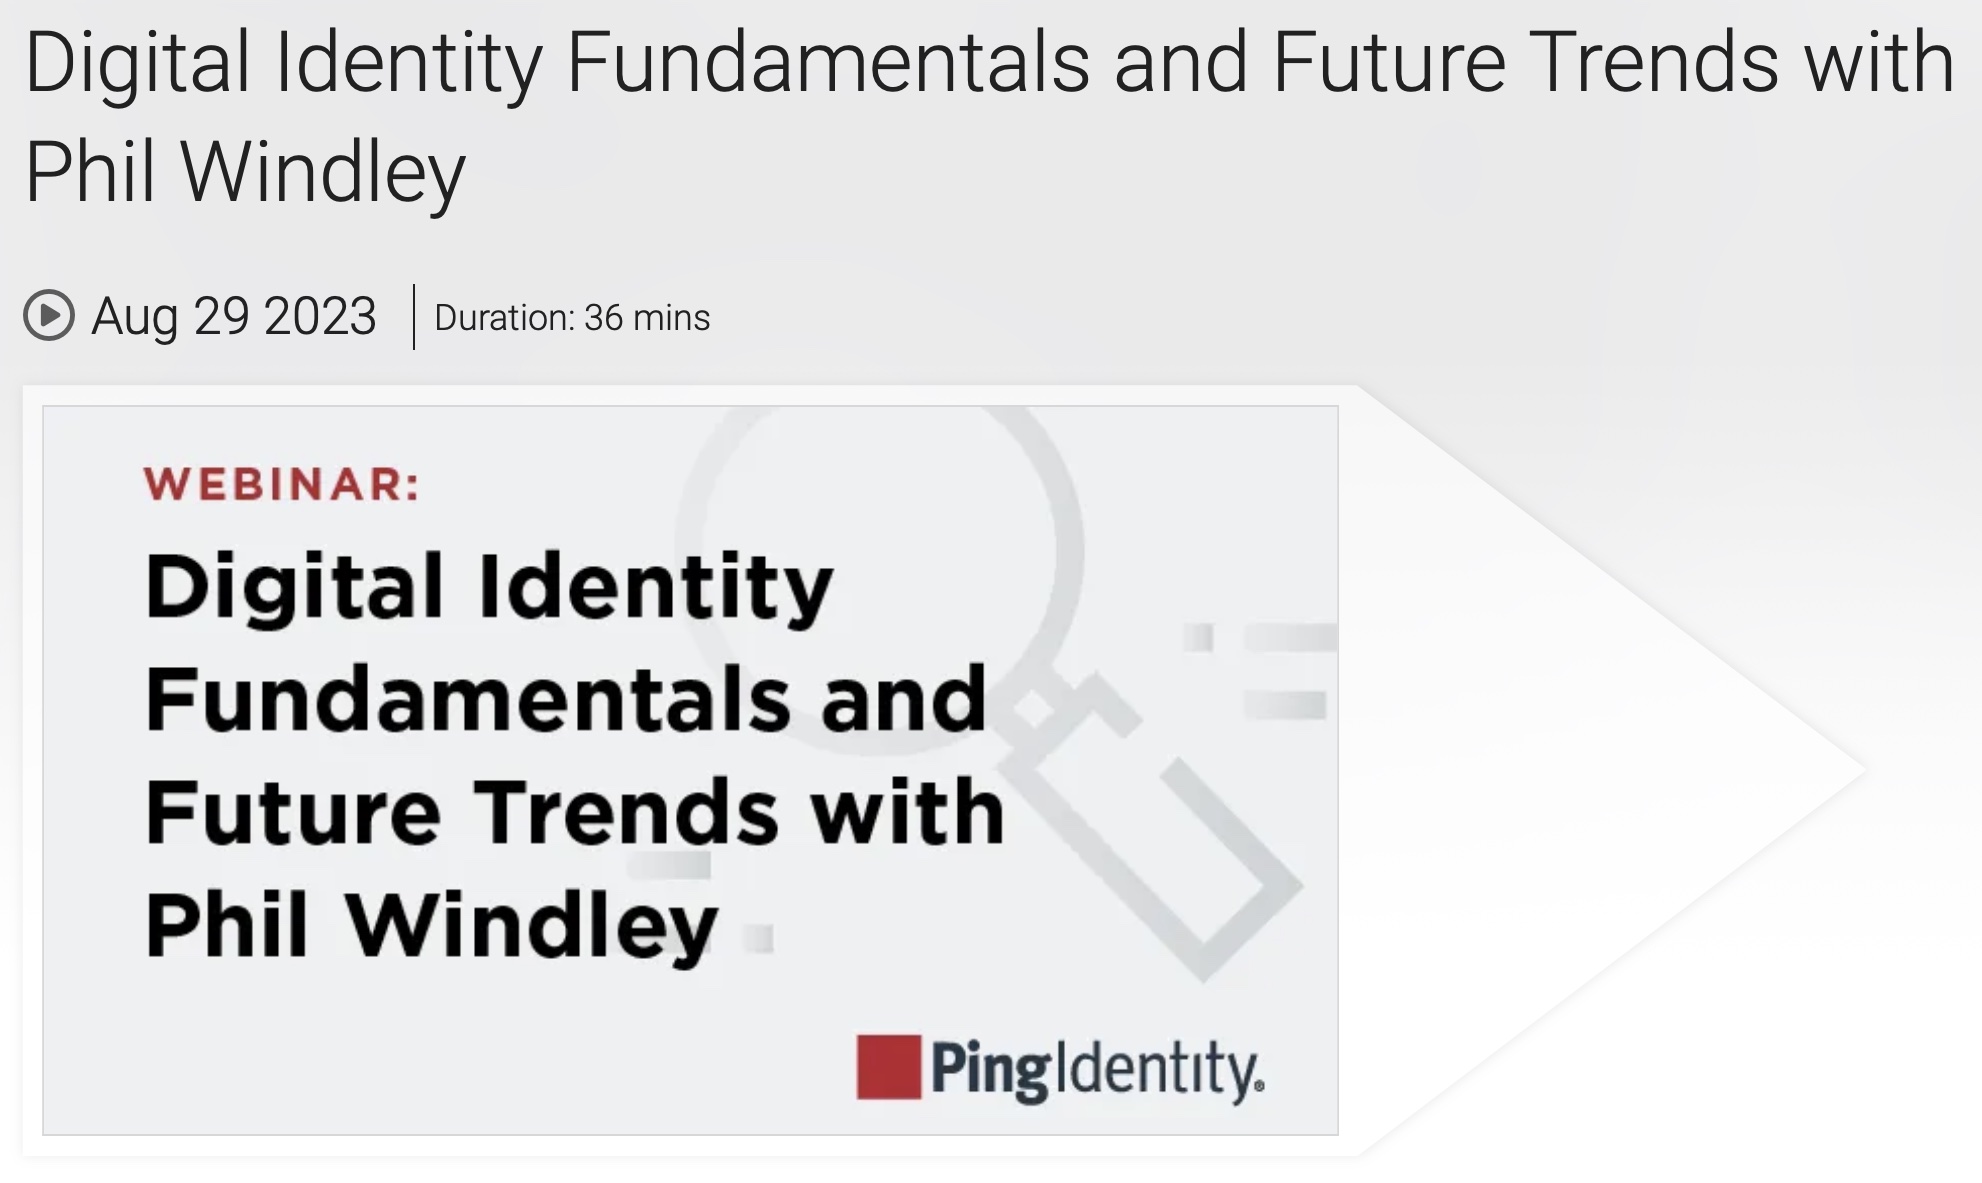 Digital Identity Fundamentals and Future Trends with Phil Windley, Part 1